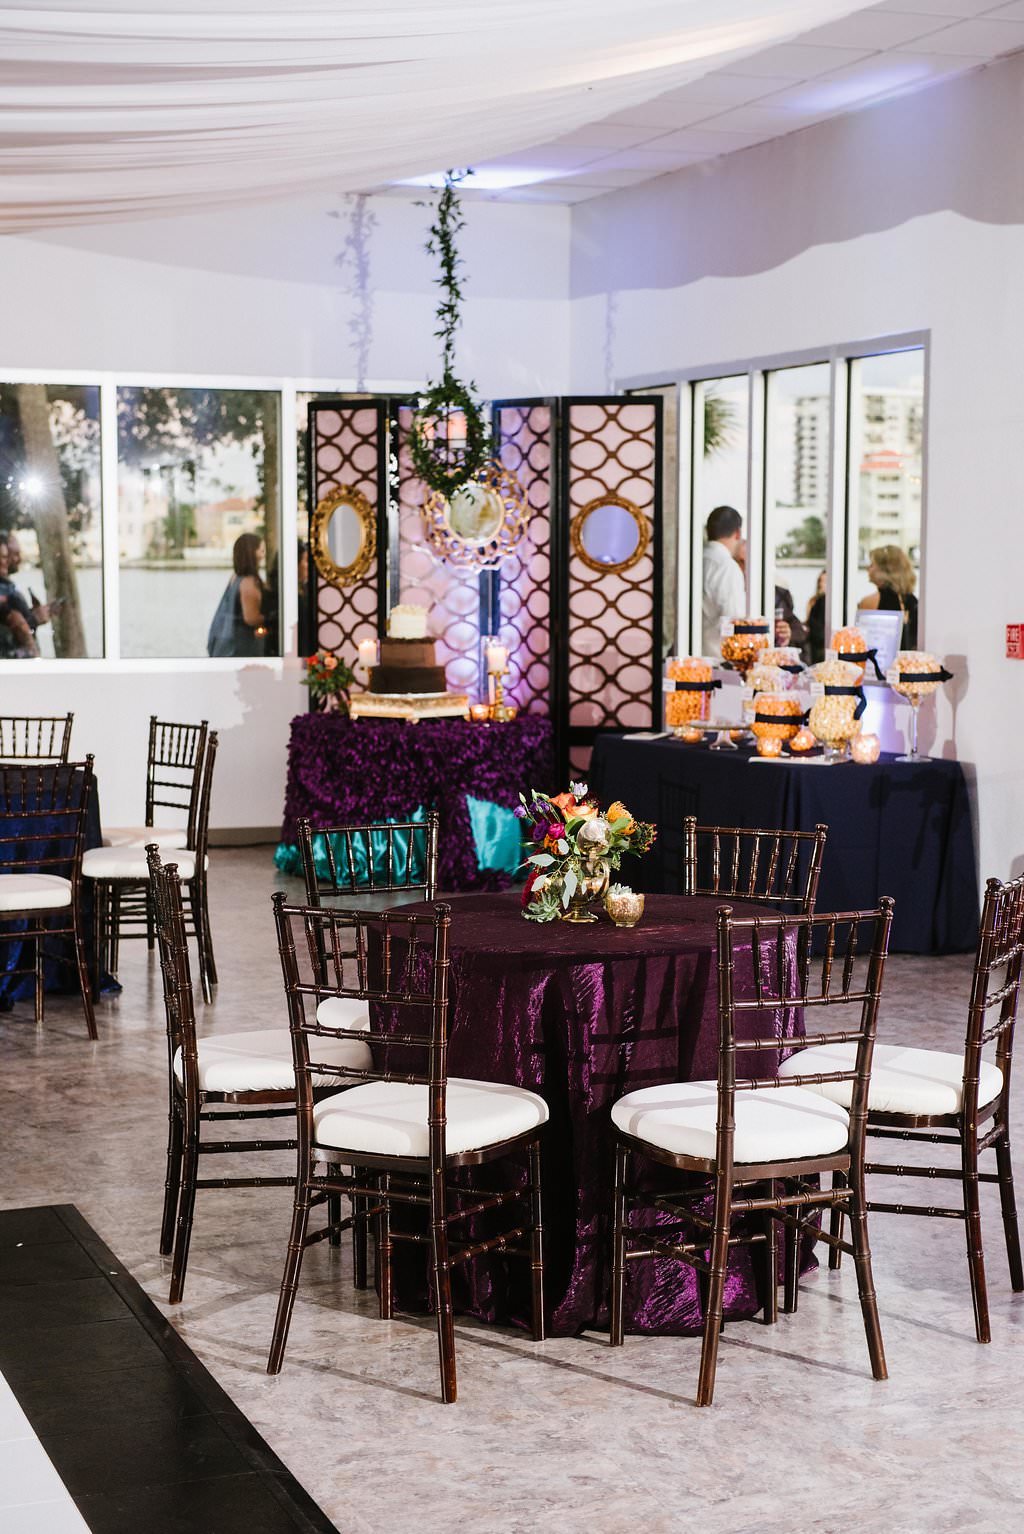 Whimsical Jewel Tone Wedding Reception with Amethyst Purple and Emerald Green Linens, and Brown Chiavari Chairs with White Cushions | Clearwater Wedding Venue Clearwater Beach Recreation Center | Tampa Bay Wedding Planner Special Moments Event Planning